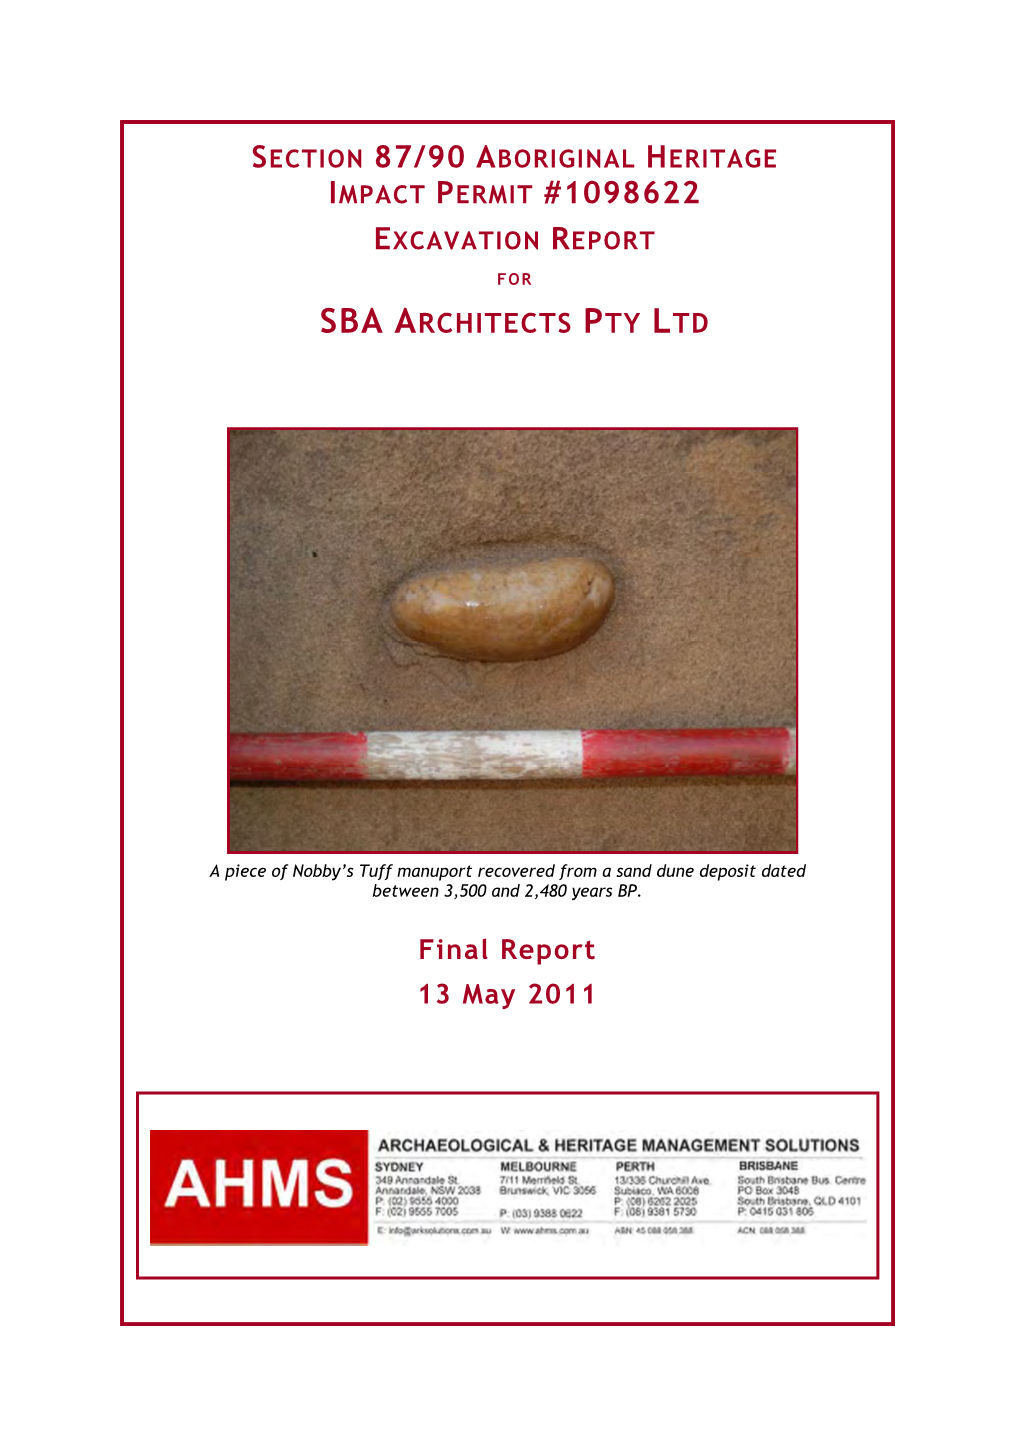 AHMS Previous Excavations at ACCOR Ibis Hotel and Riverwalk in Relation to the Study Area